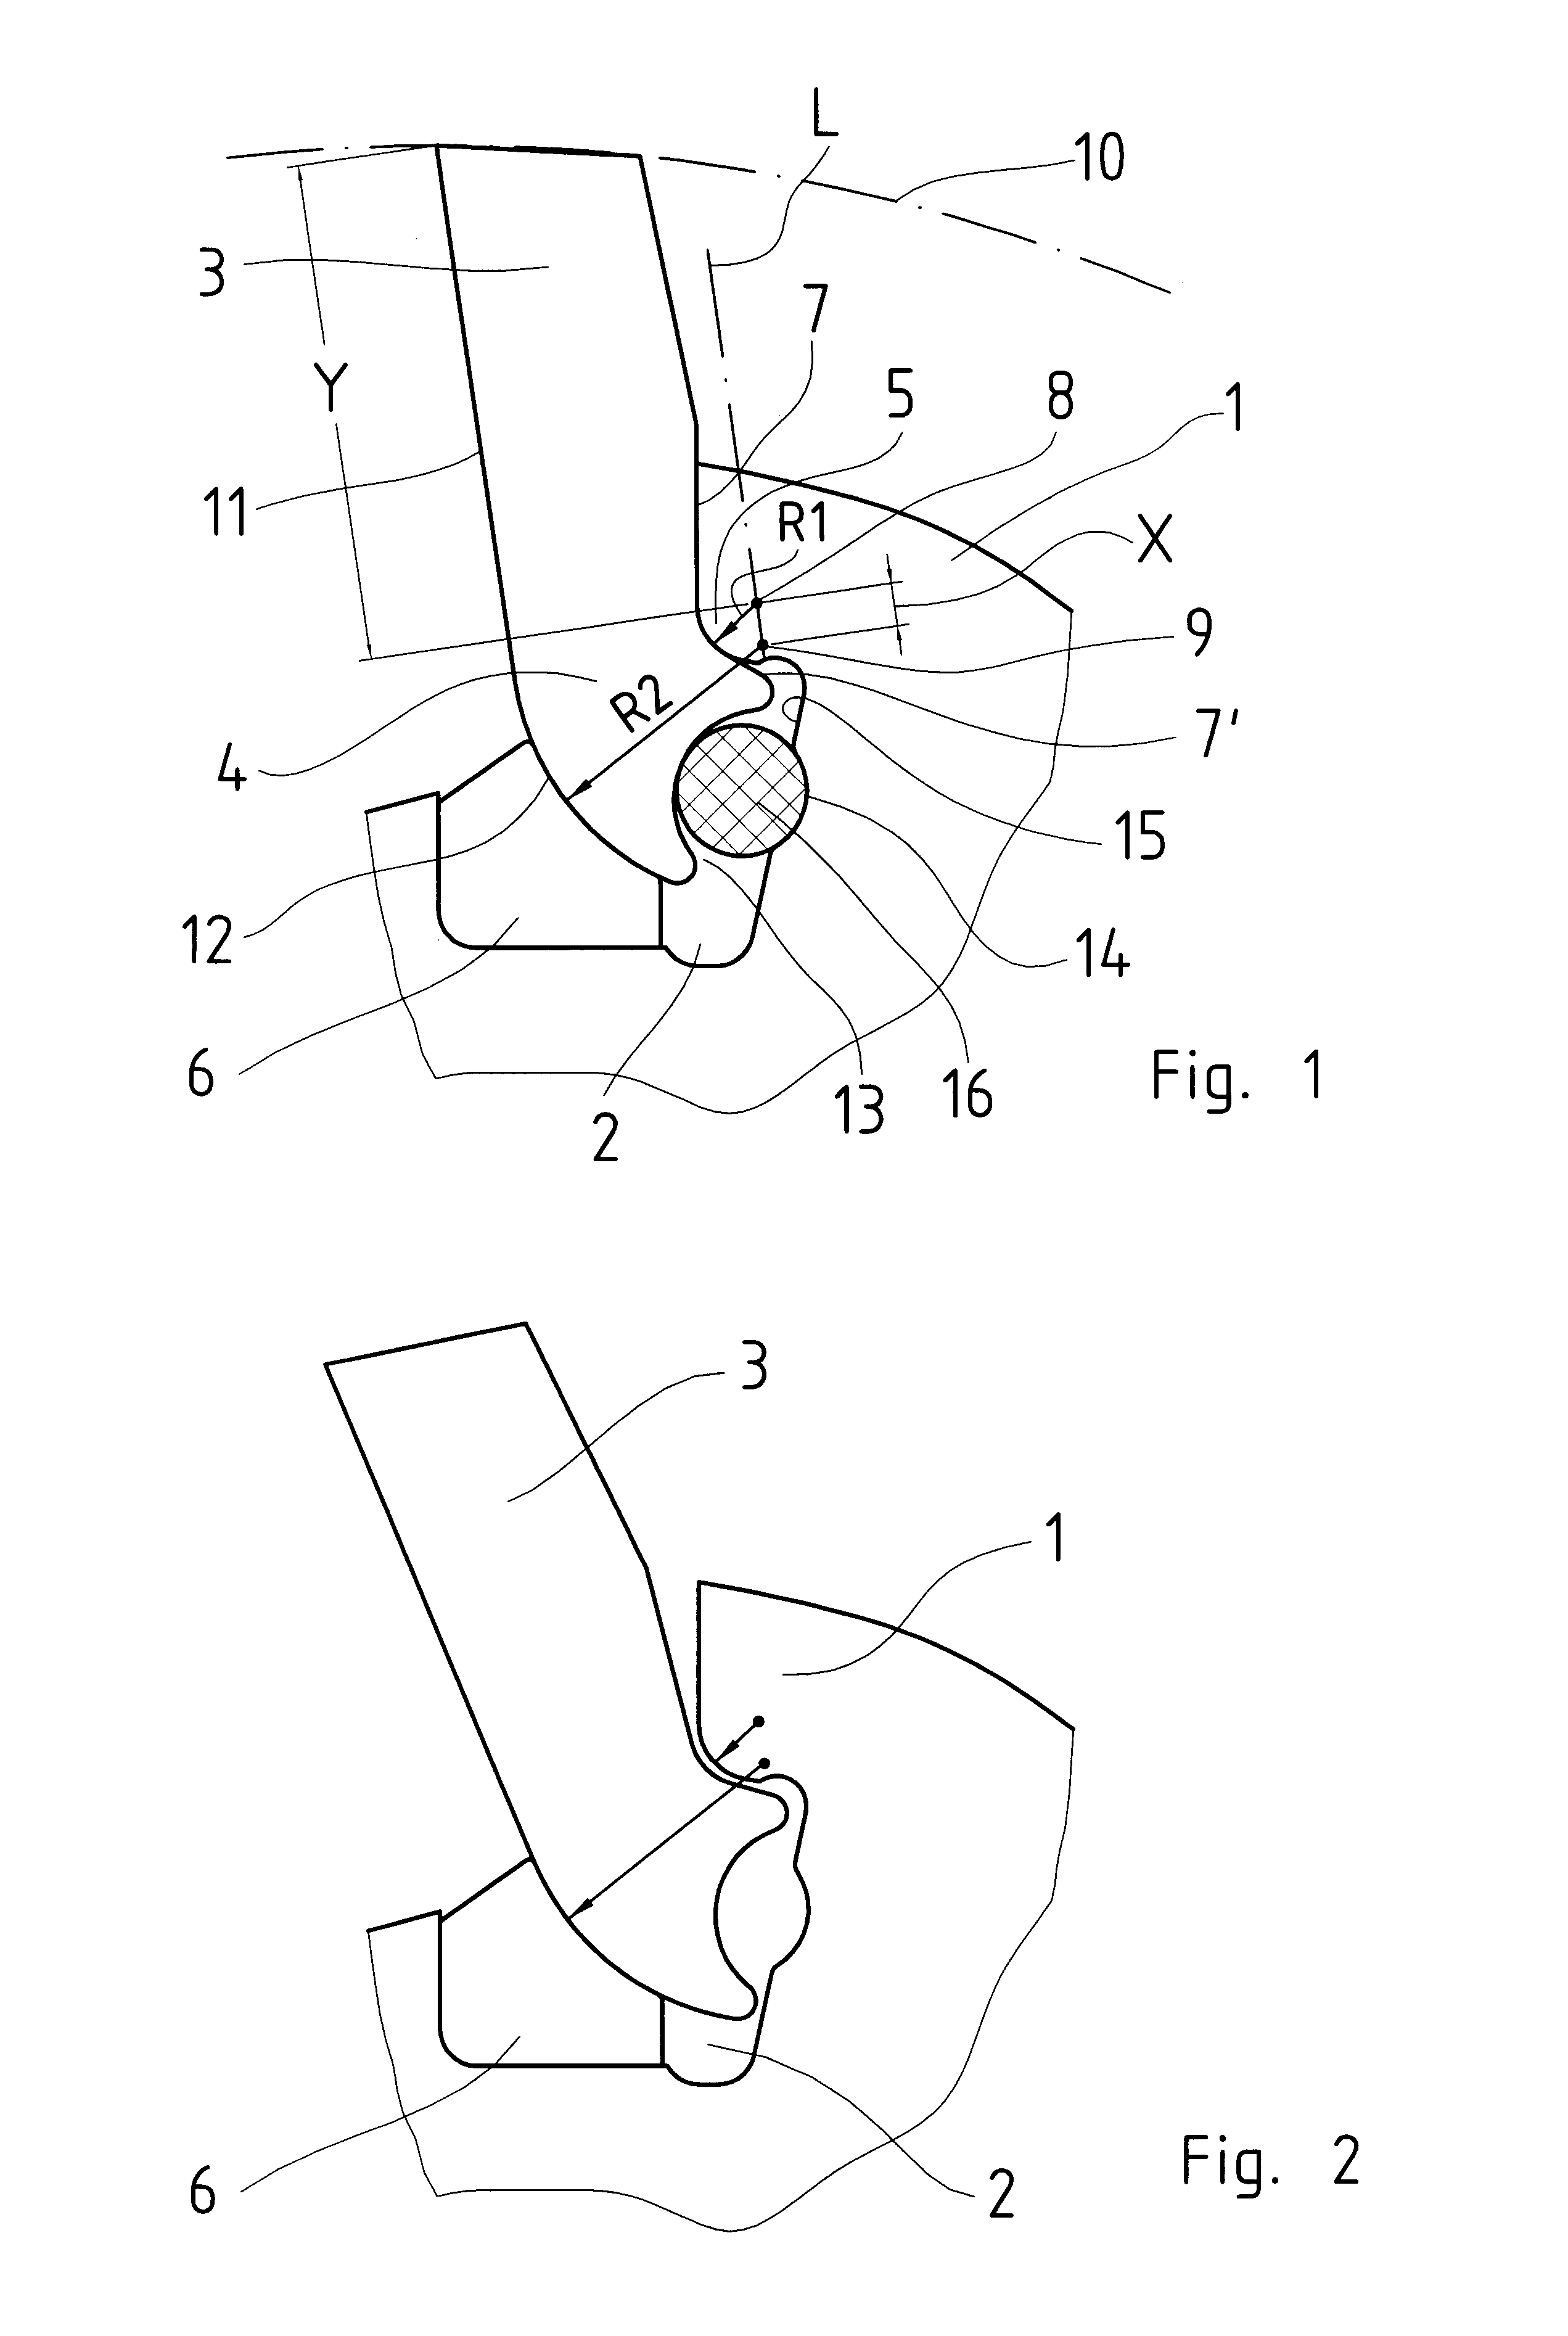 Beater bar capable of being acted upon on one side for impactor rotors